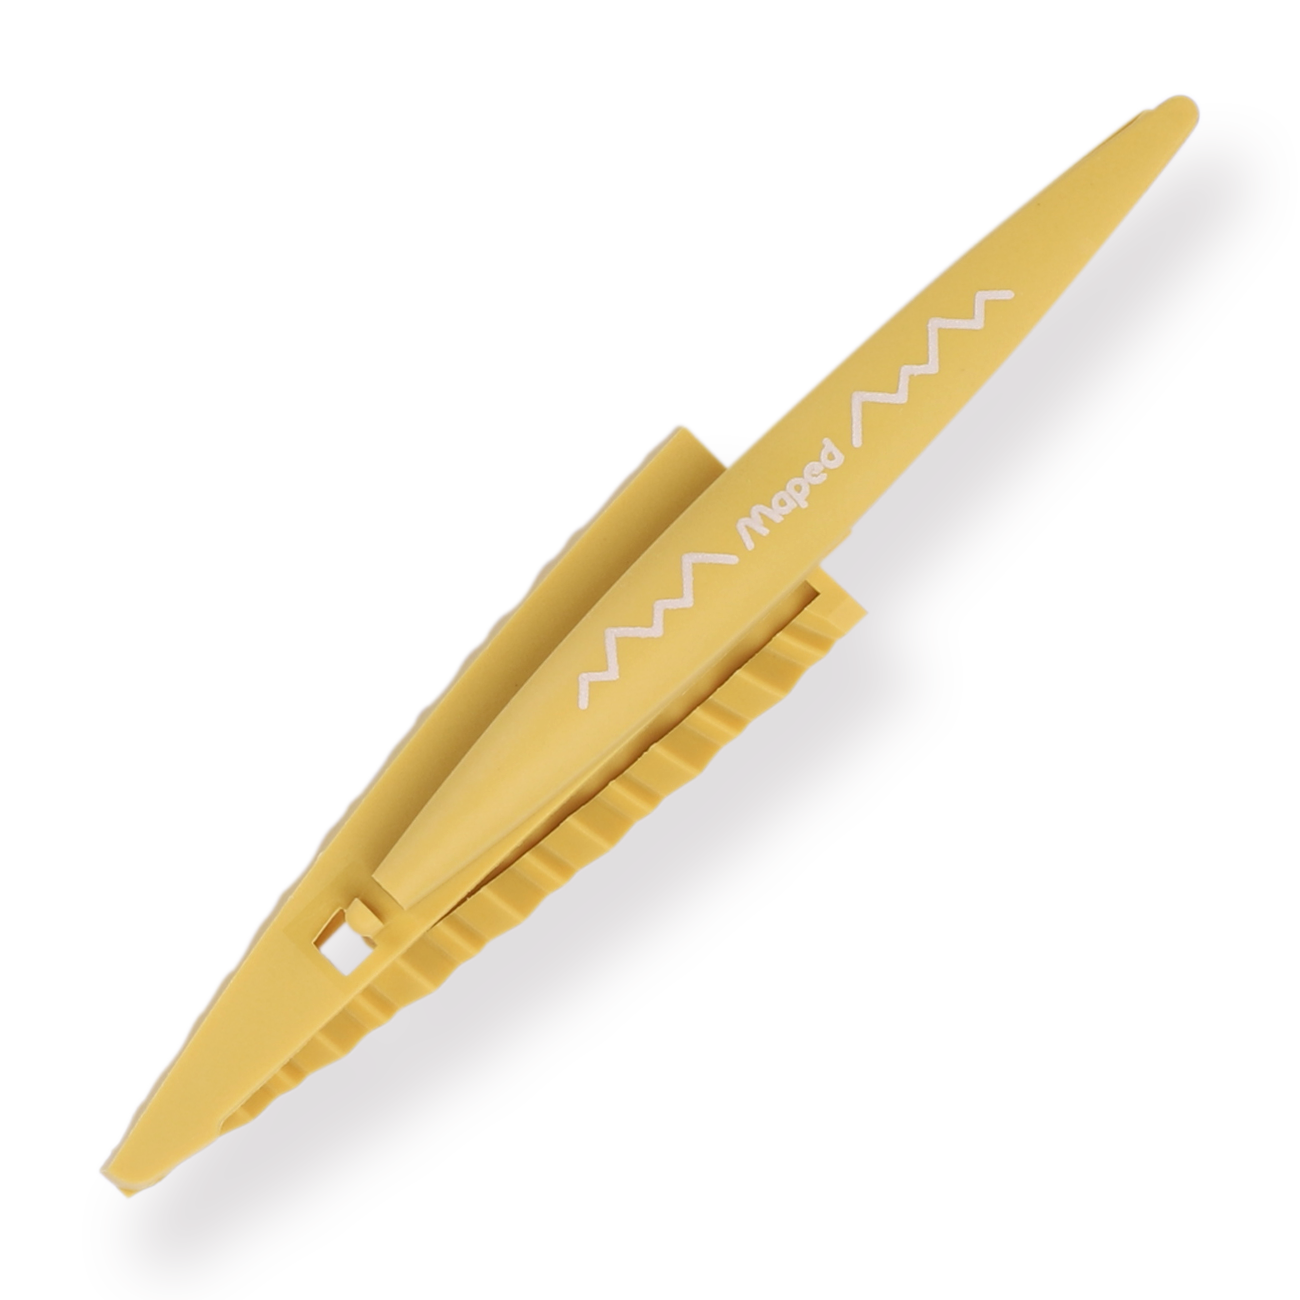 Maped  Pen Store